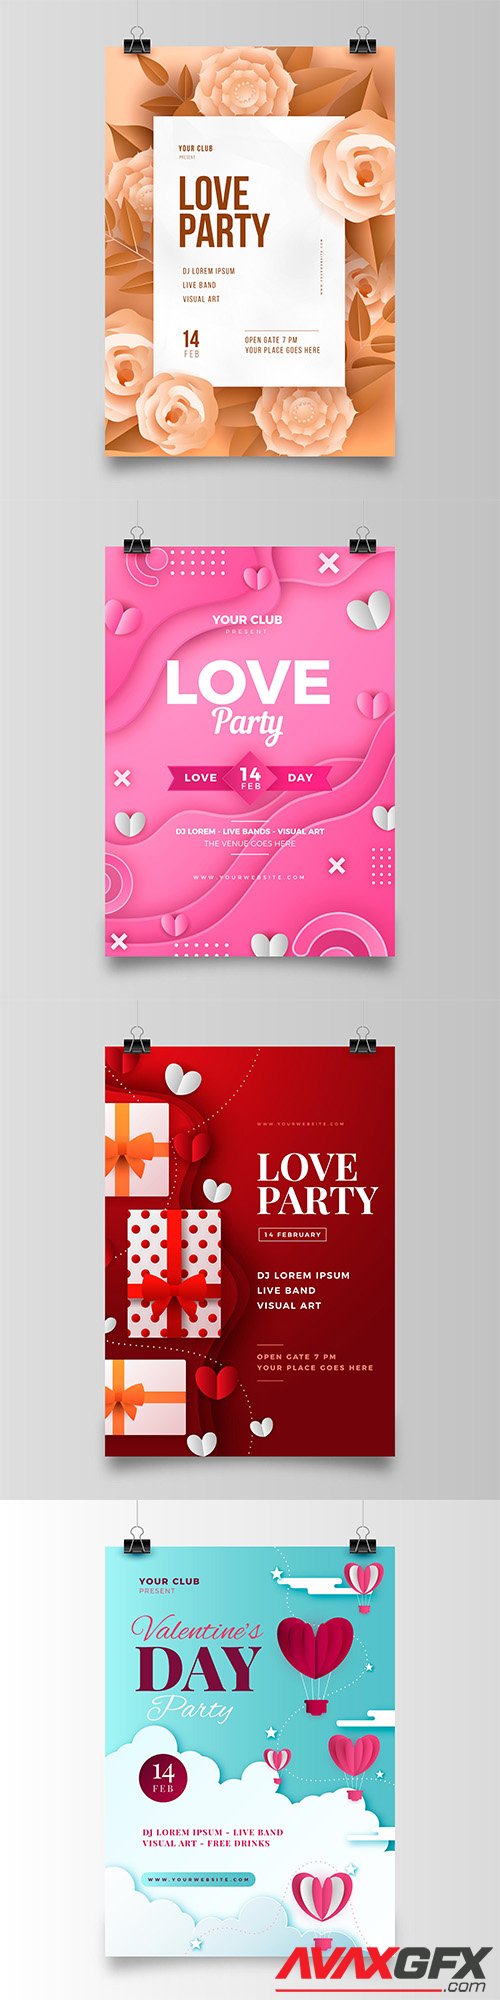 Valentines day party flyer template collection